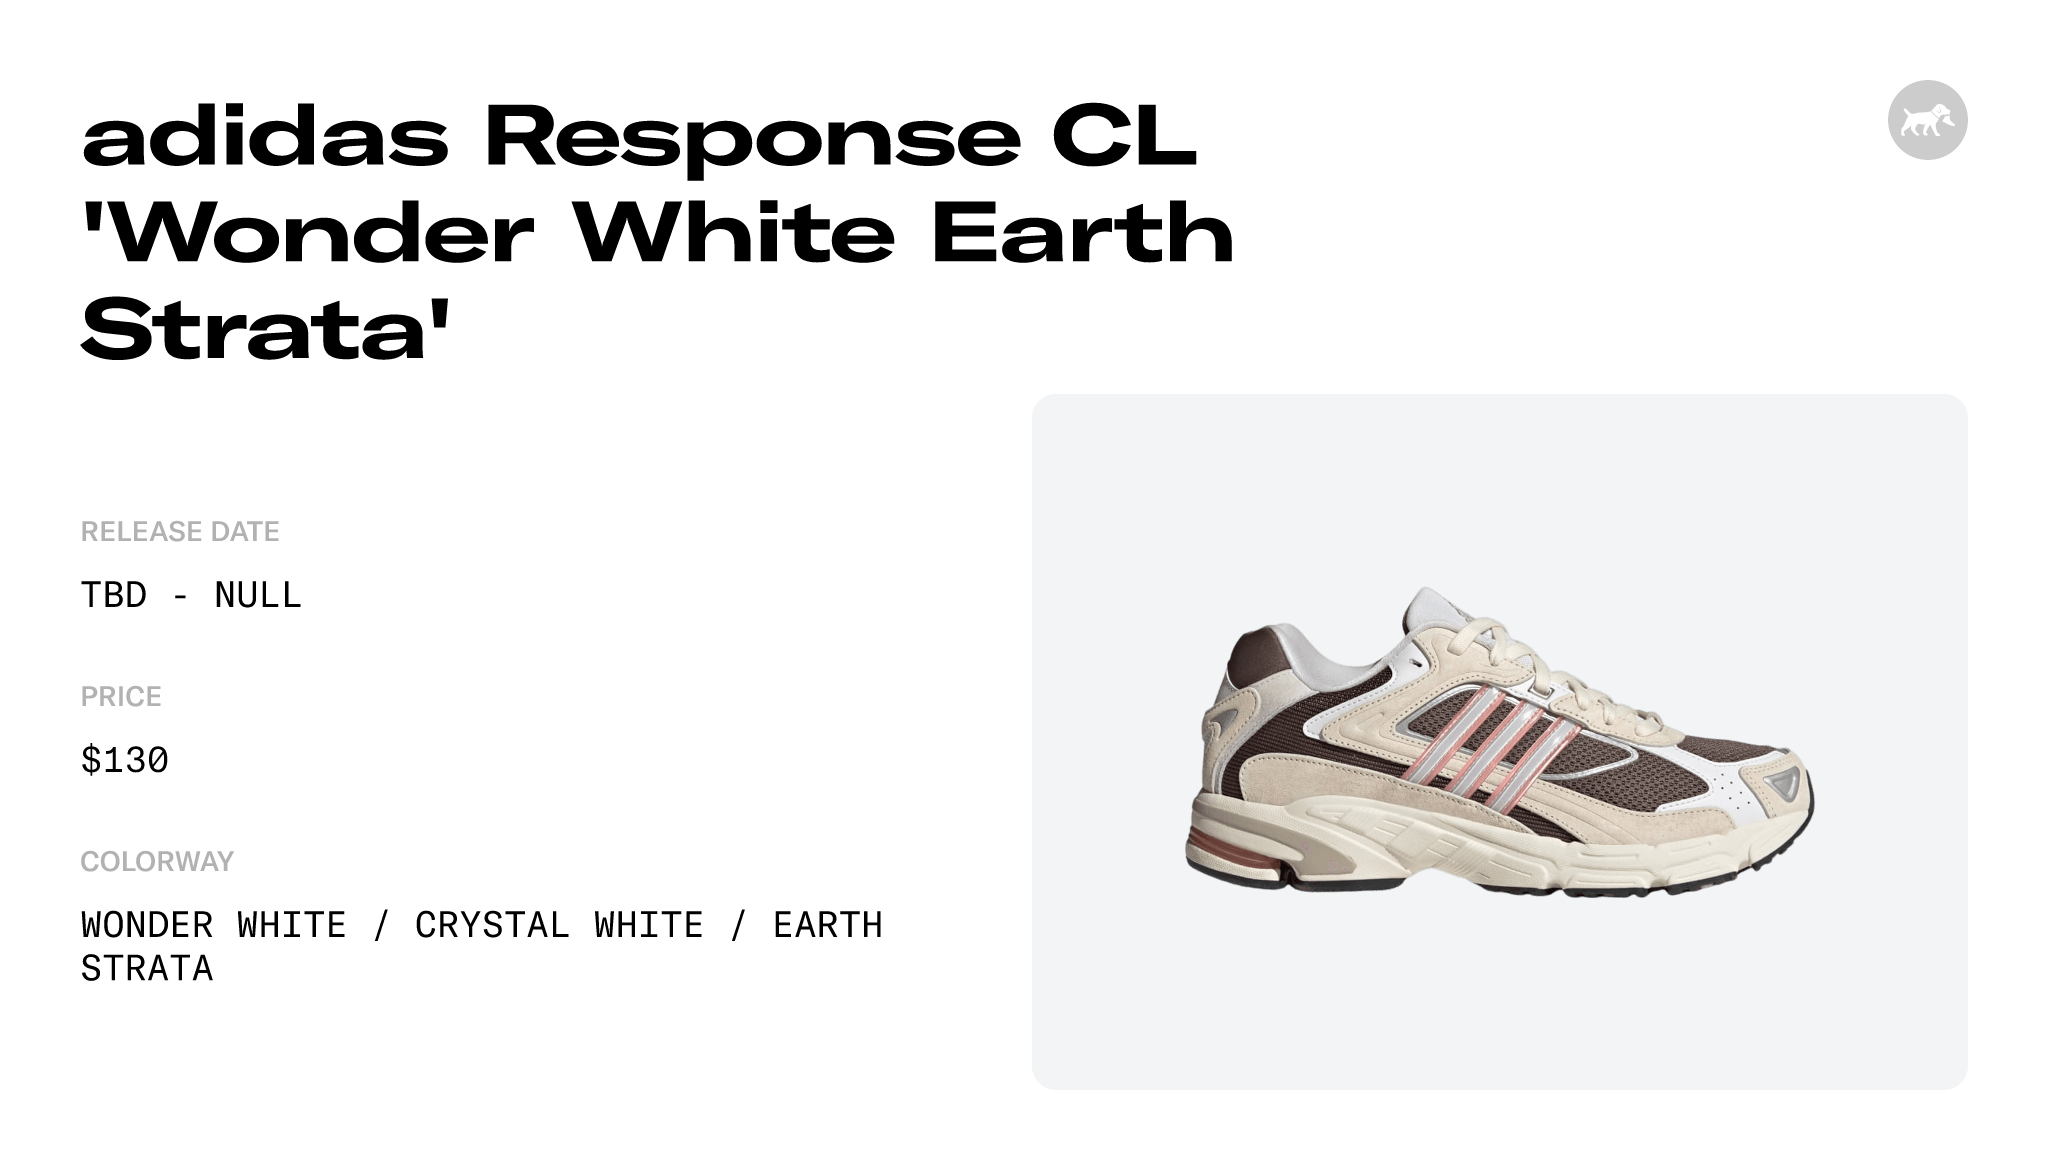 adidas Response CL \'Wonder White Earth Strata\' - IG3079 Raffles and Release  Date